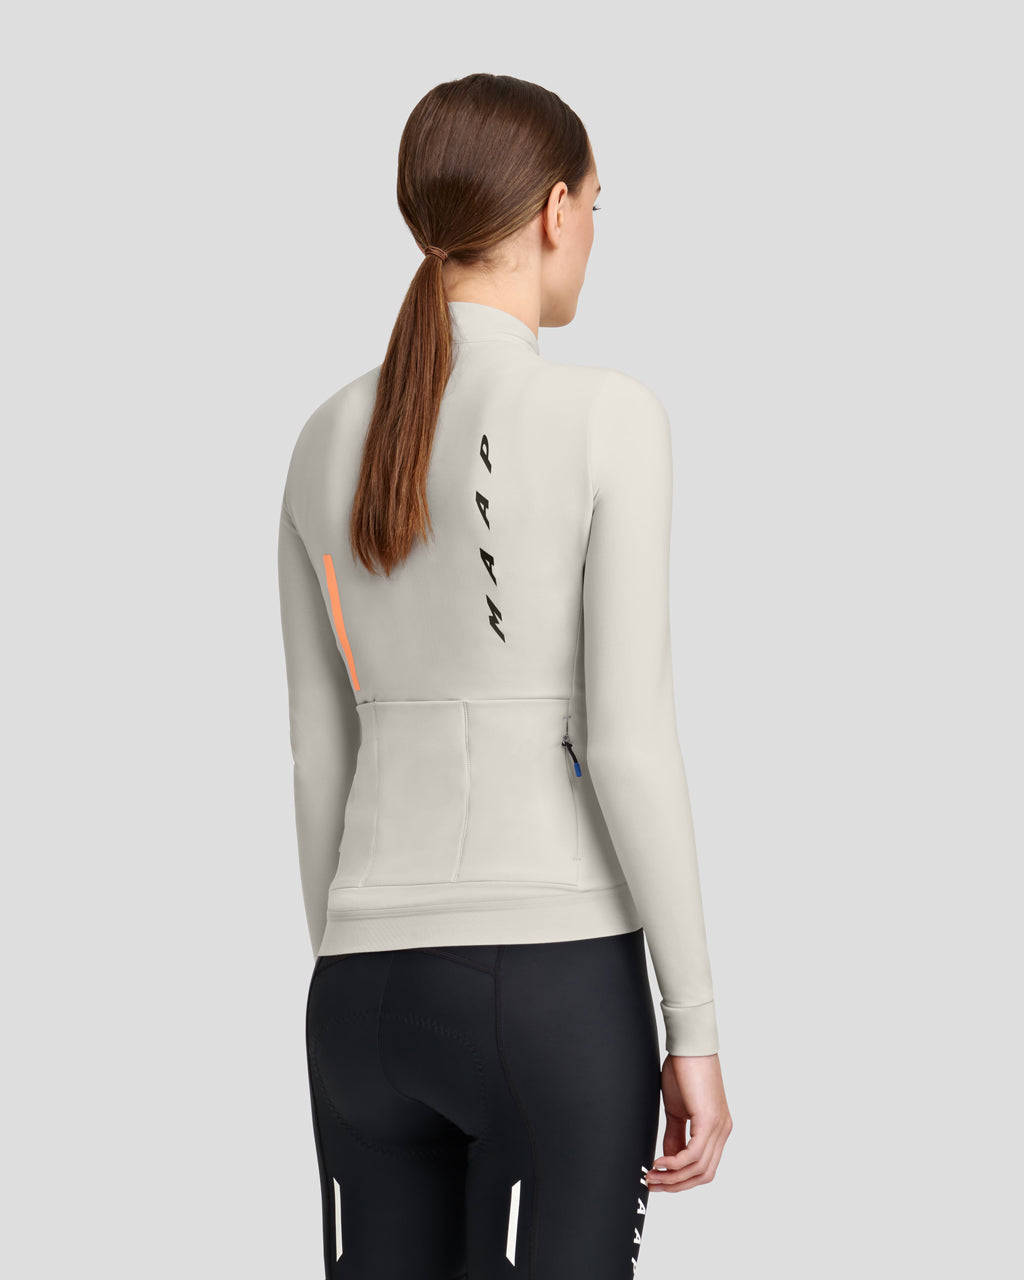 MAAP Cycling Thermal Long Sleeve Full Zip Jersey - Womens SMALL